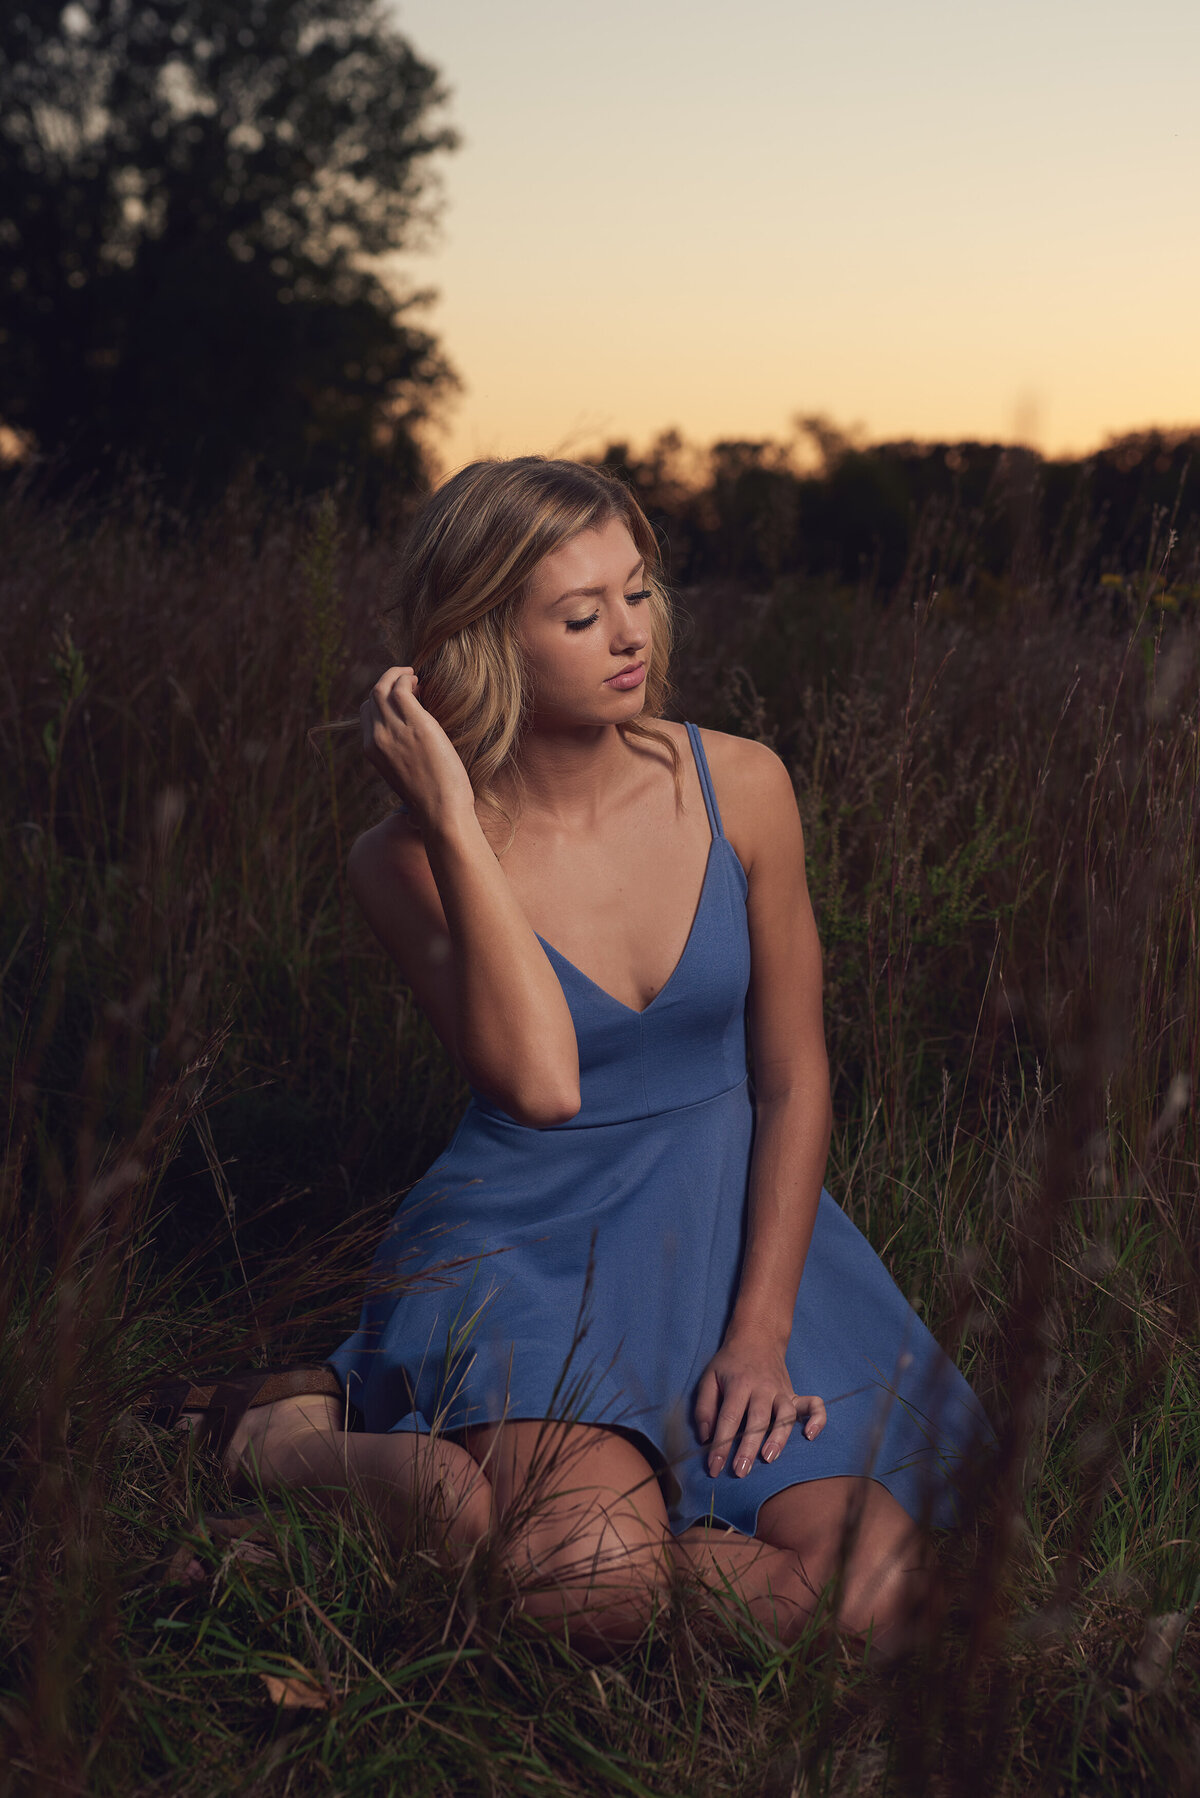 Sunset senior pictures in a field Minnesota3